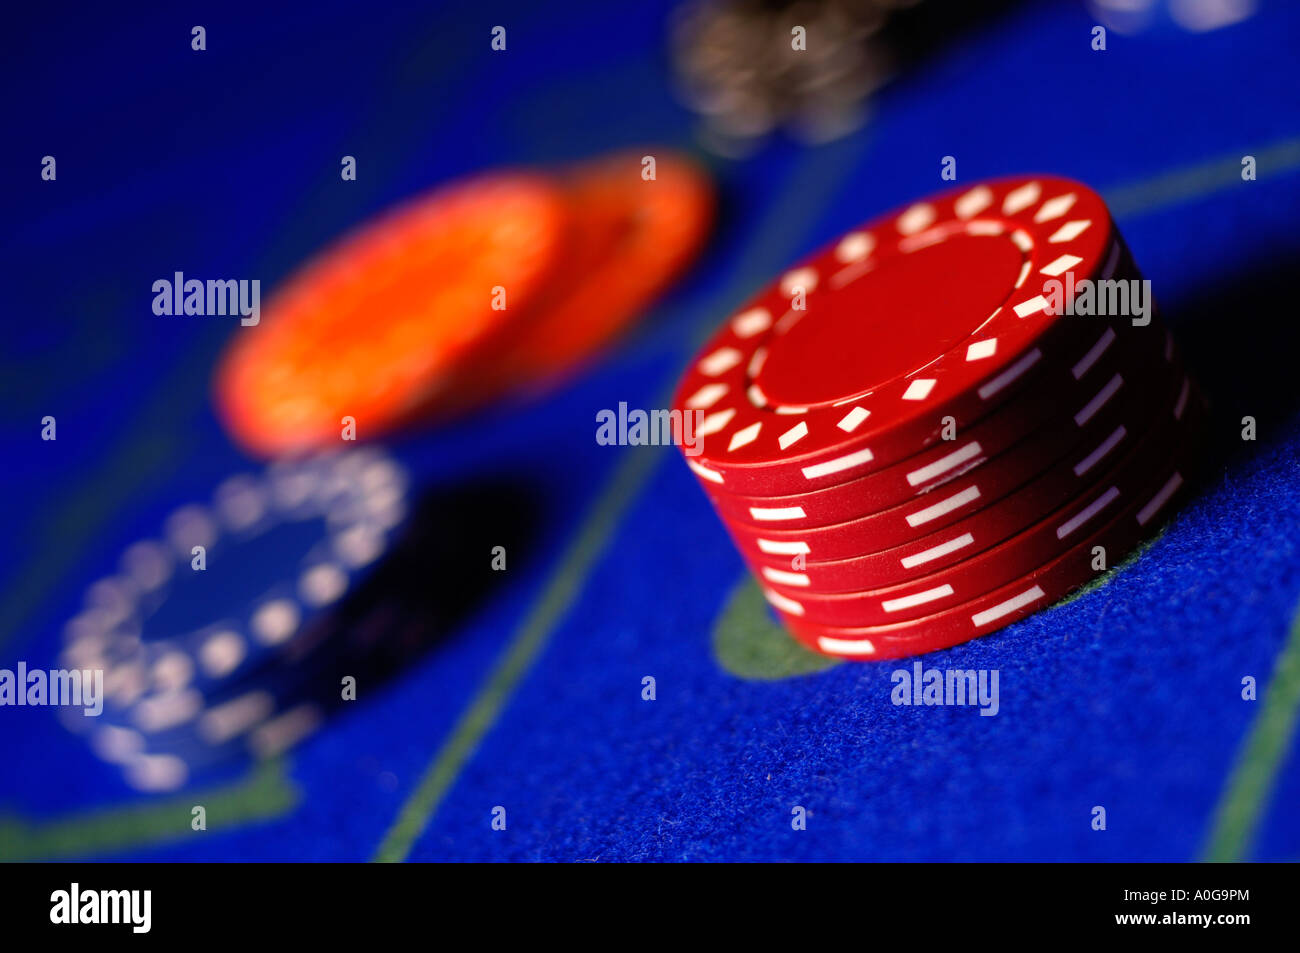 Chips on blue roulette table Stock Photo